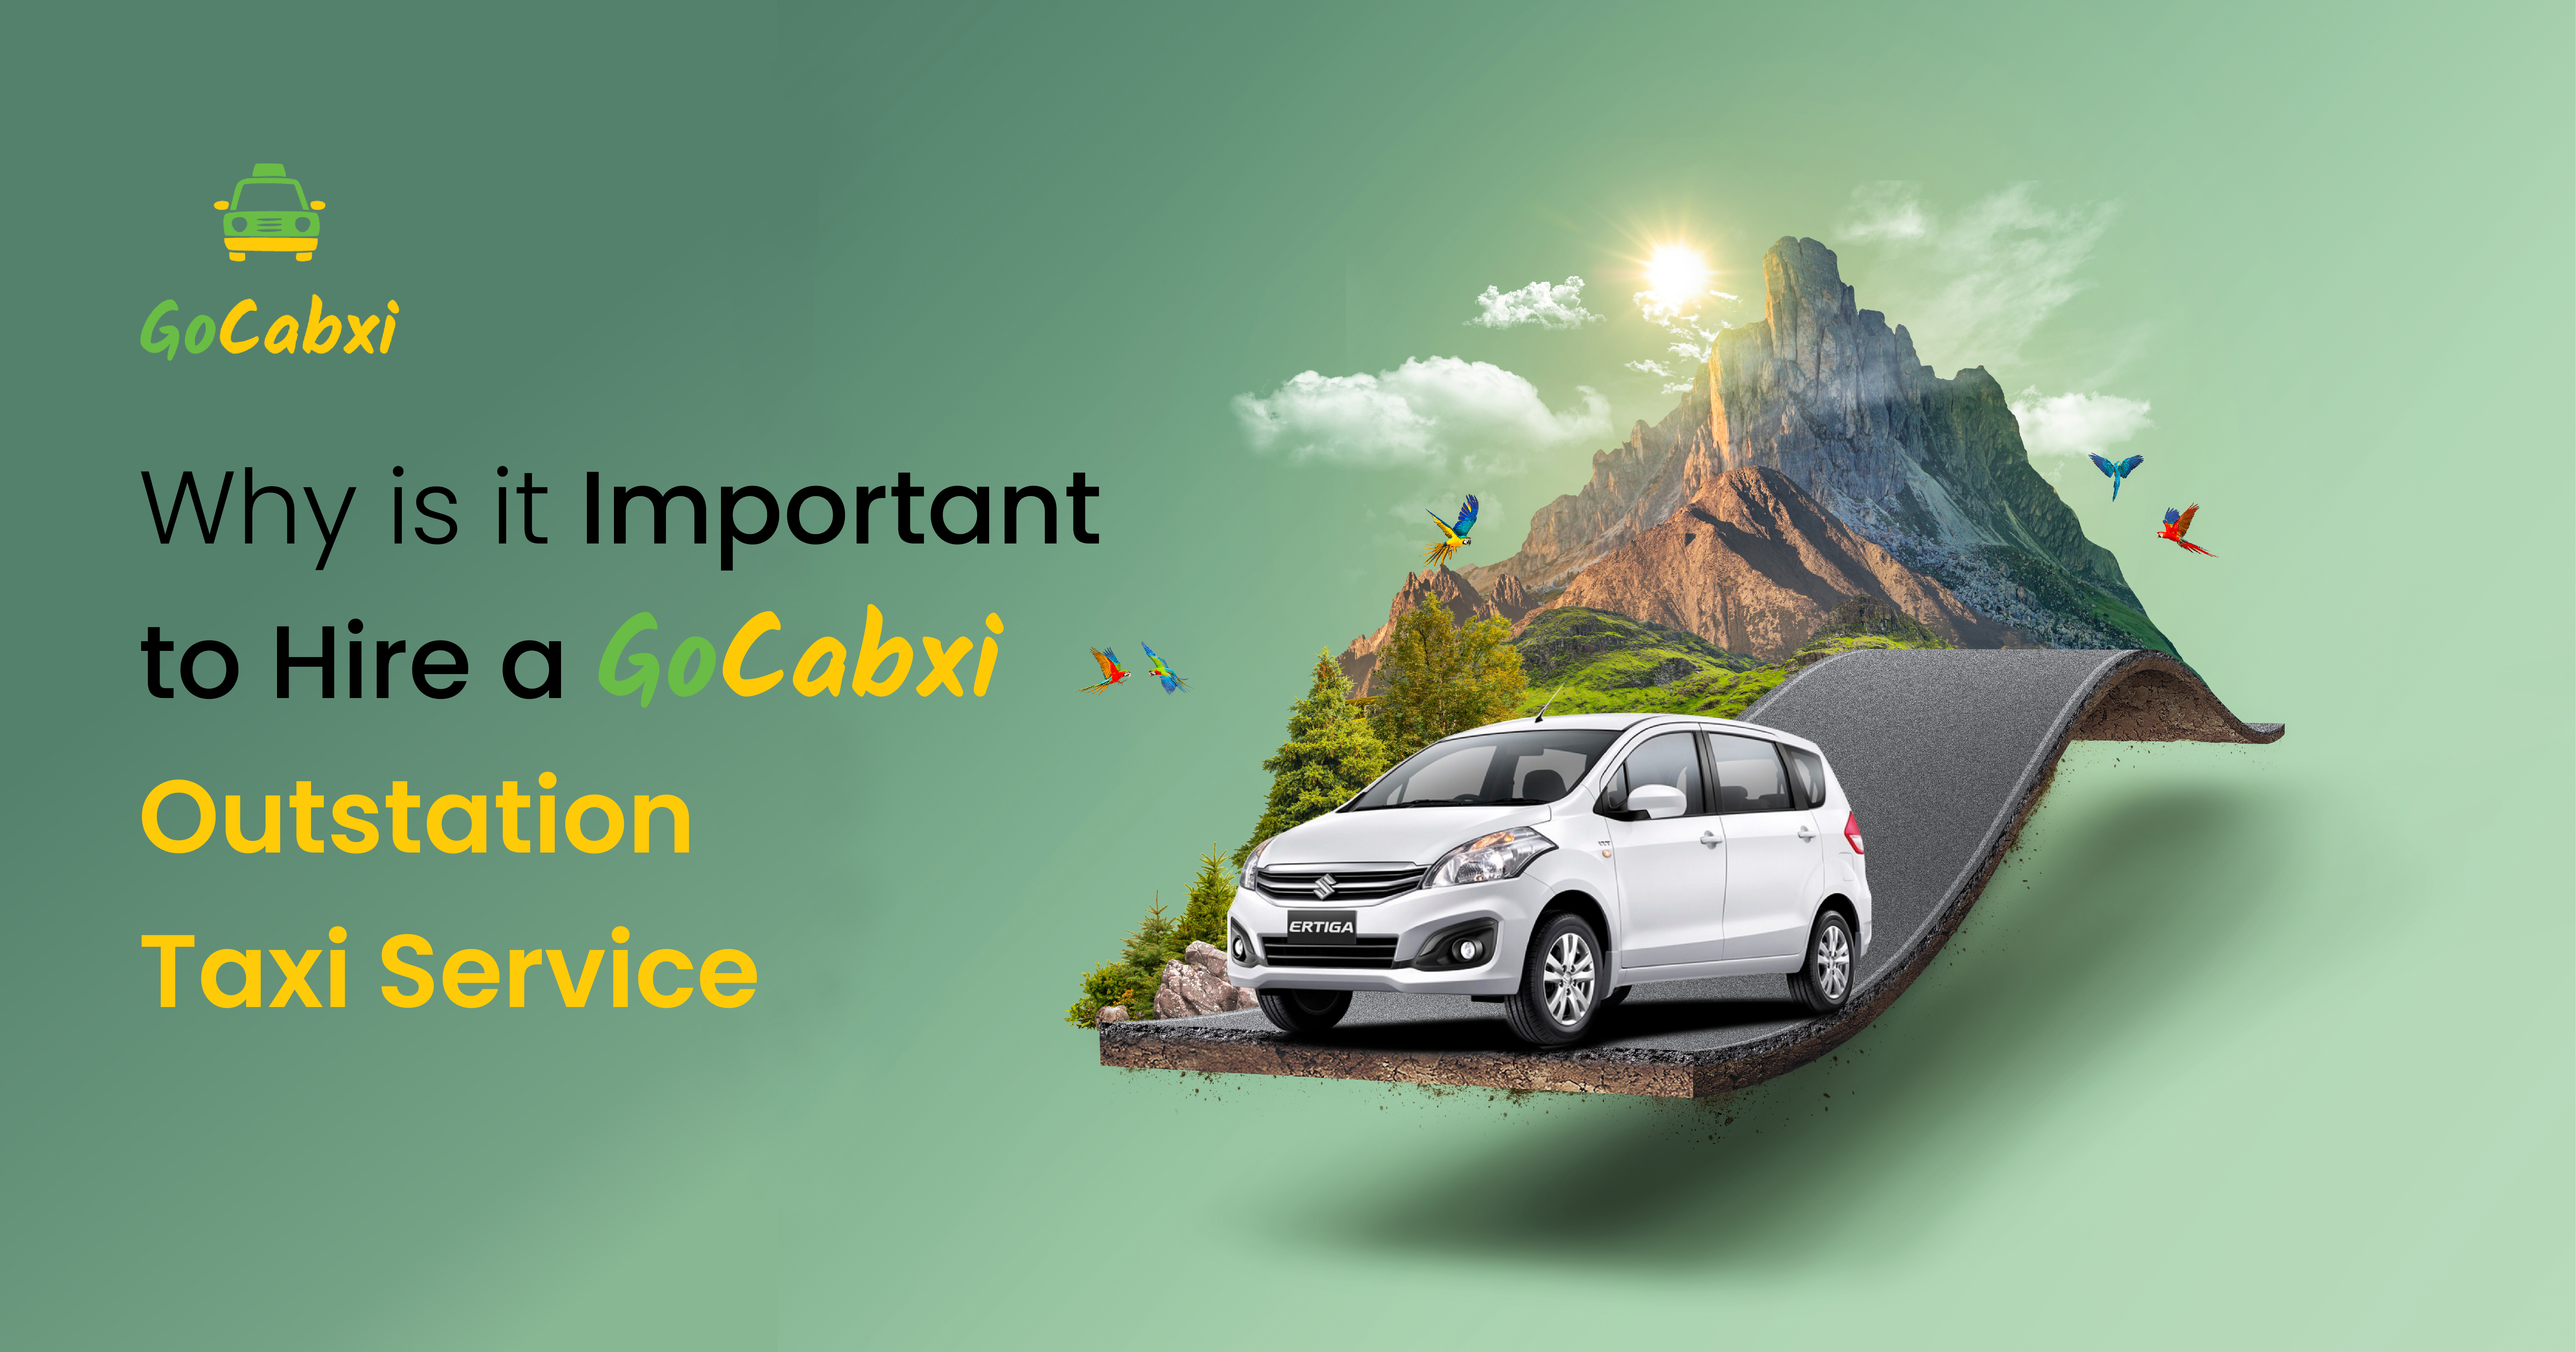 Why is it Important to Hire a Gocabxi Outstation Taxi Service